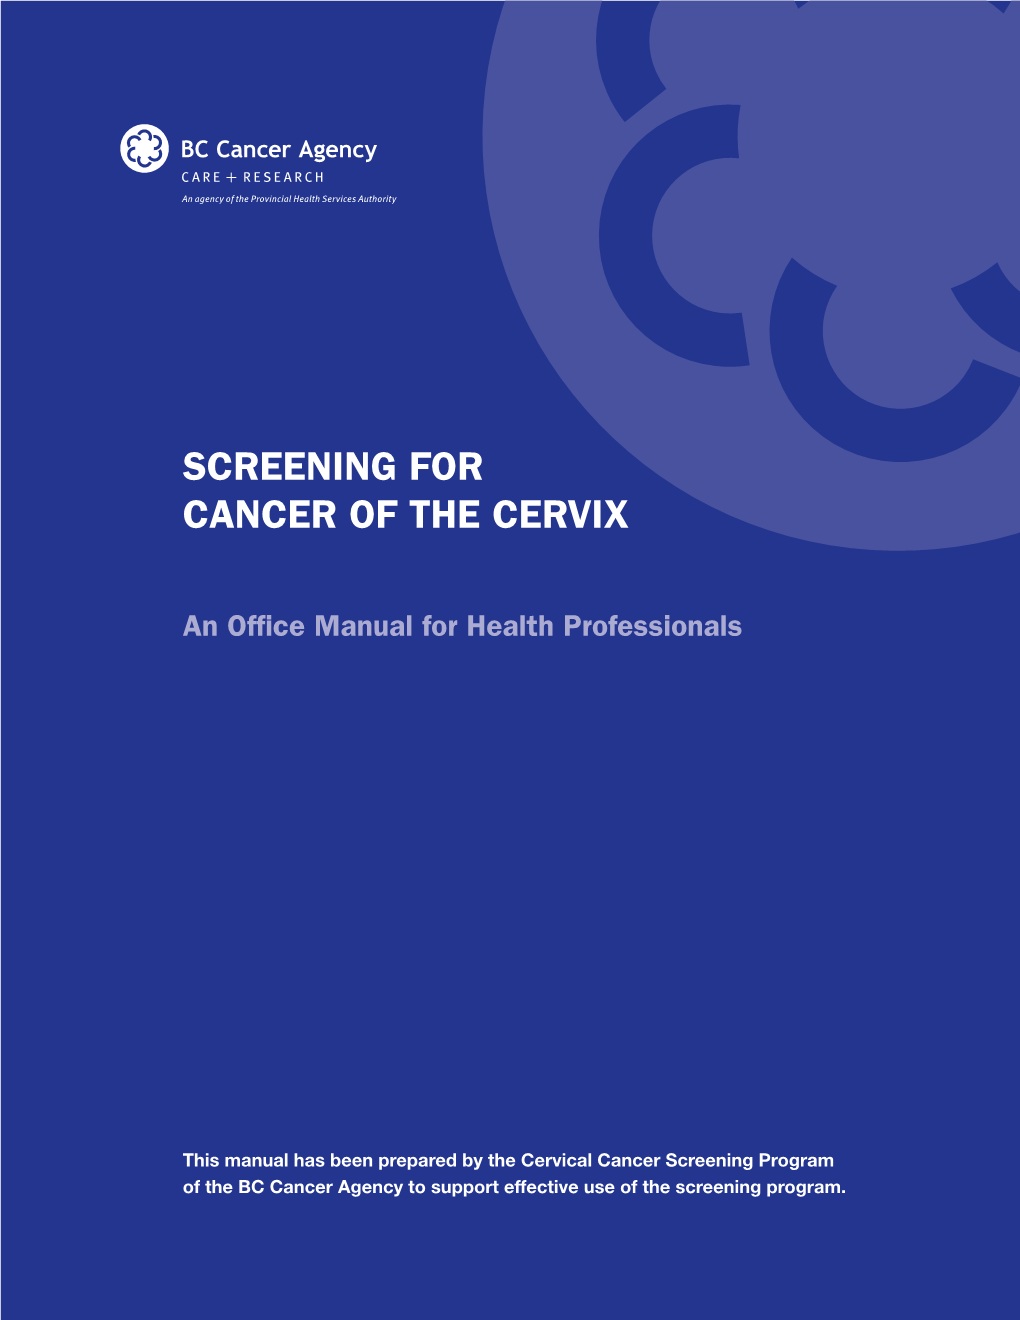 Screening for Cancer of the Cervix